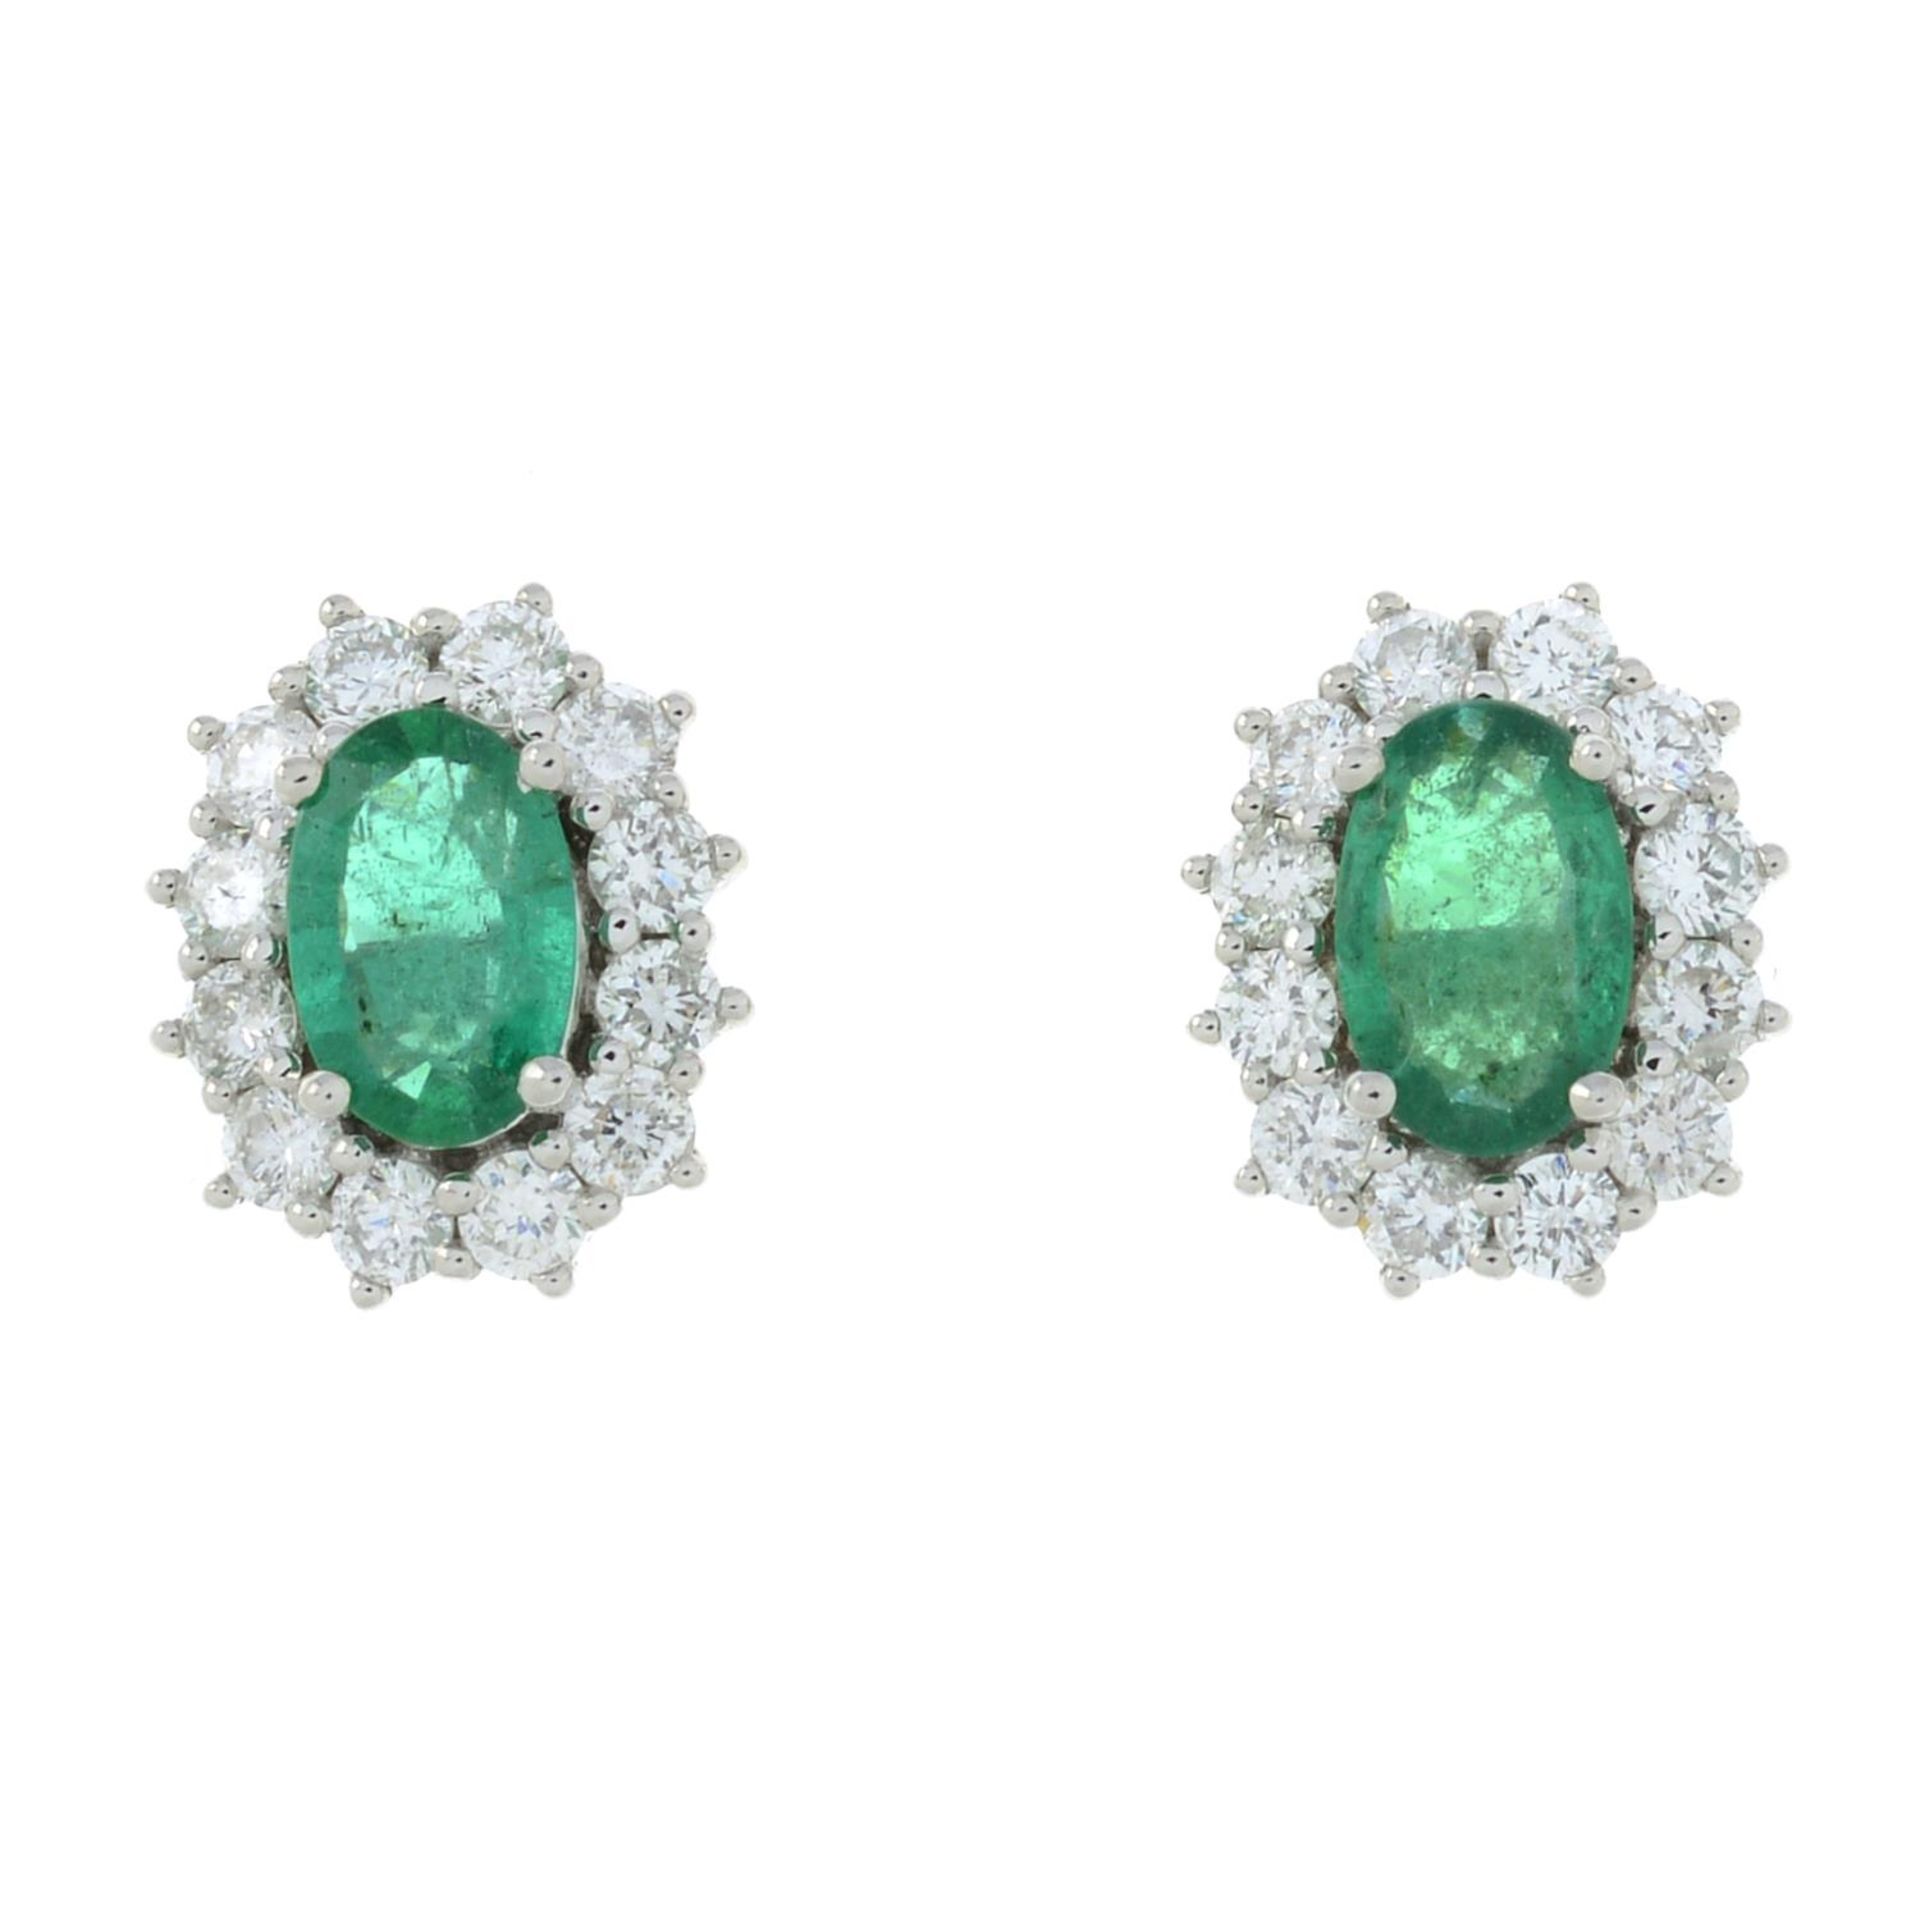 A pair of 18ct gold emerald and diamond cluster stud earrings.Total emerald weight 0.59ct.